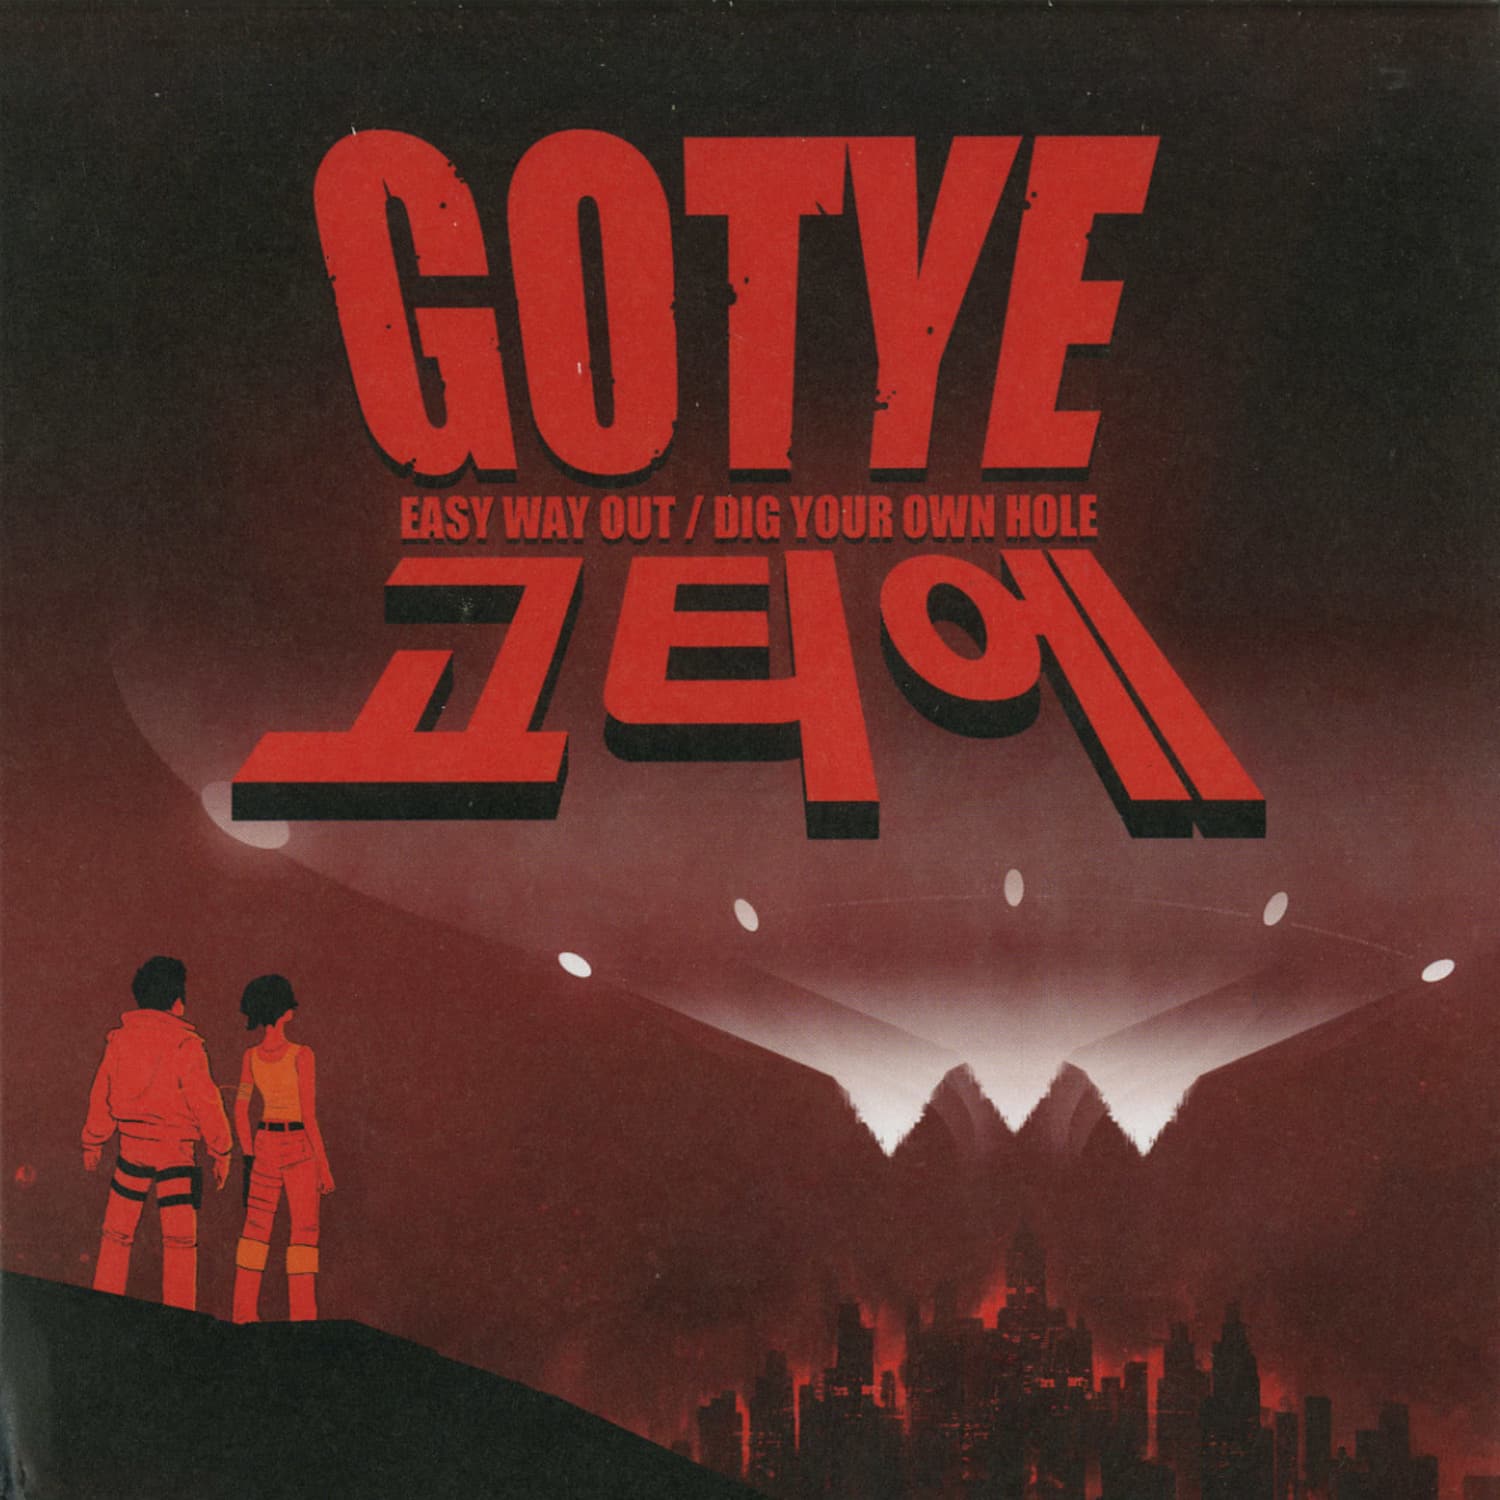 Goyte - EASY WAY OUT / DIG YOUR OWN HOLE 